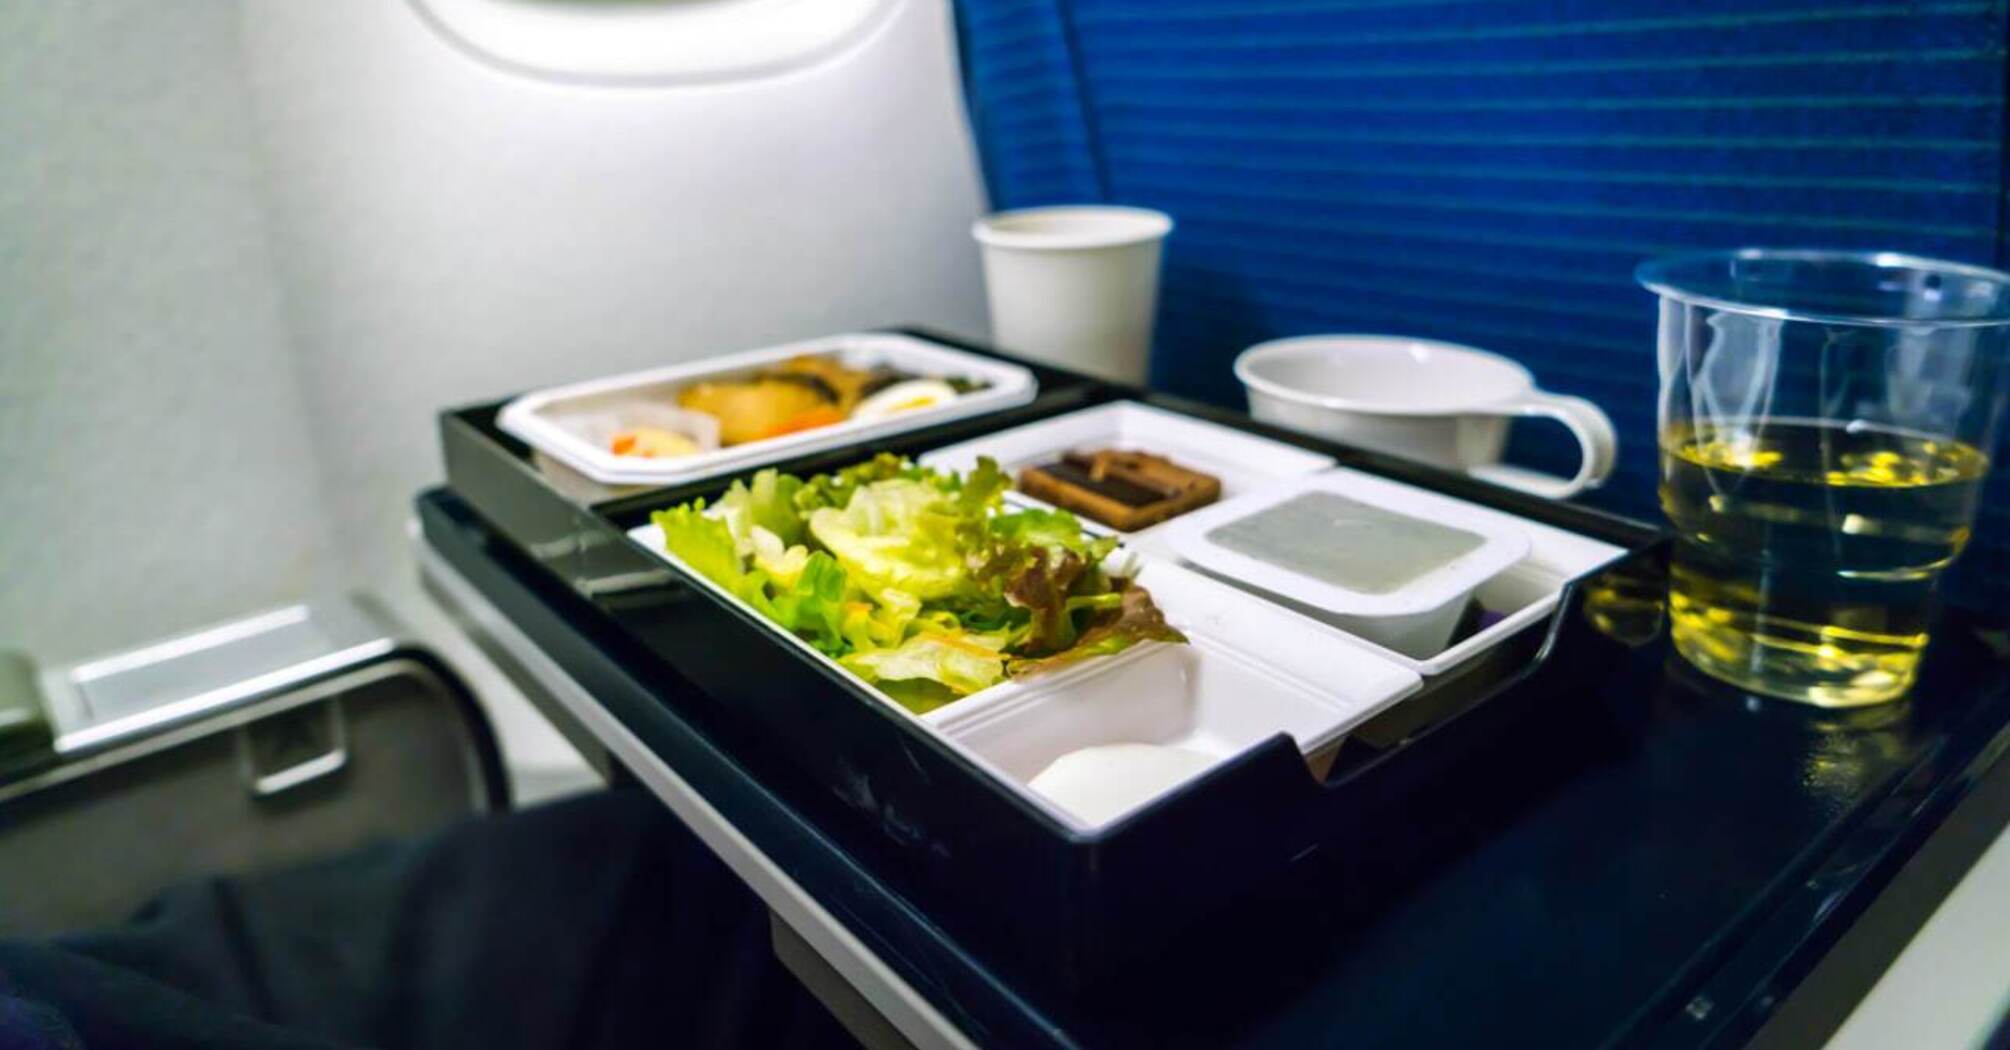 "Juicy" sausages, terrible coffee and unappetizing pancakes: airplane passengers rated airline breakfasts